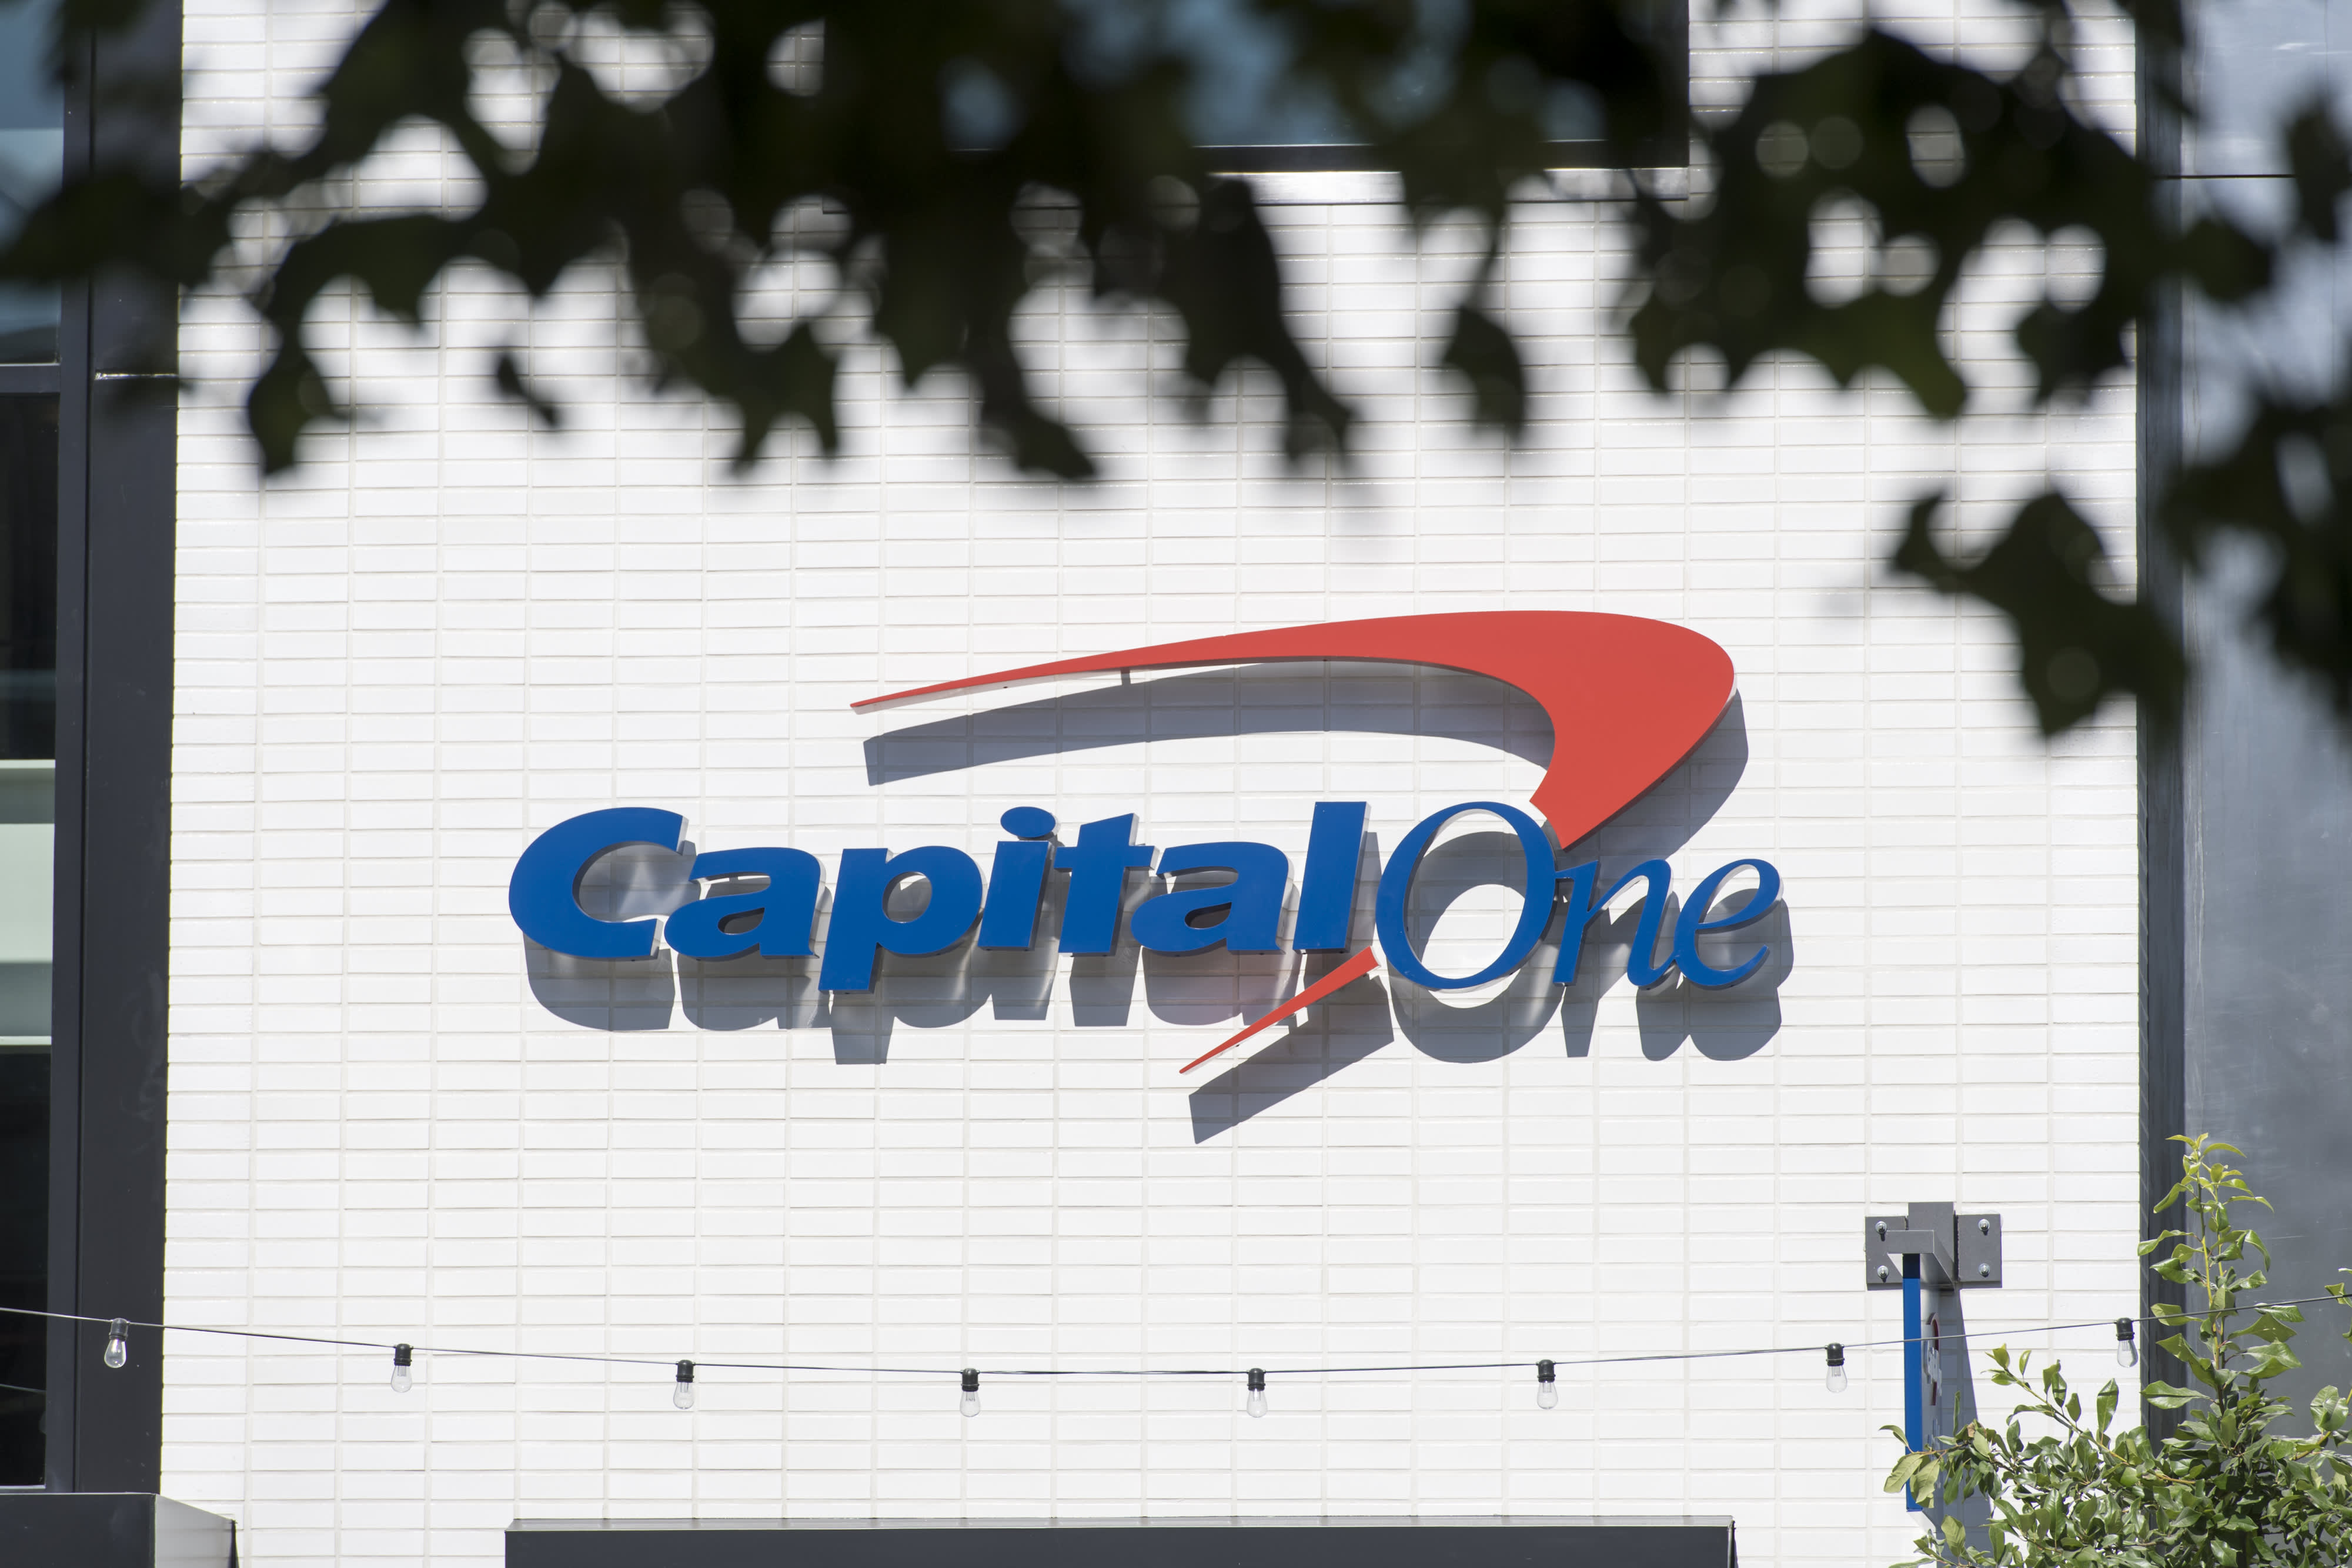 Capital one customer service credit card number